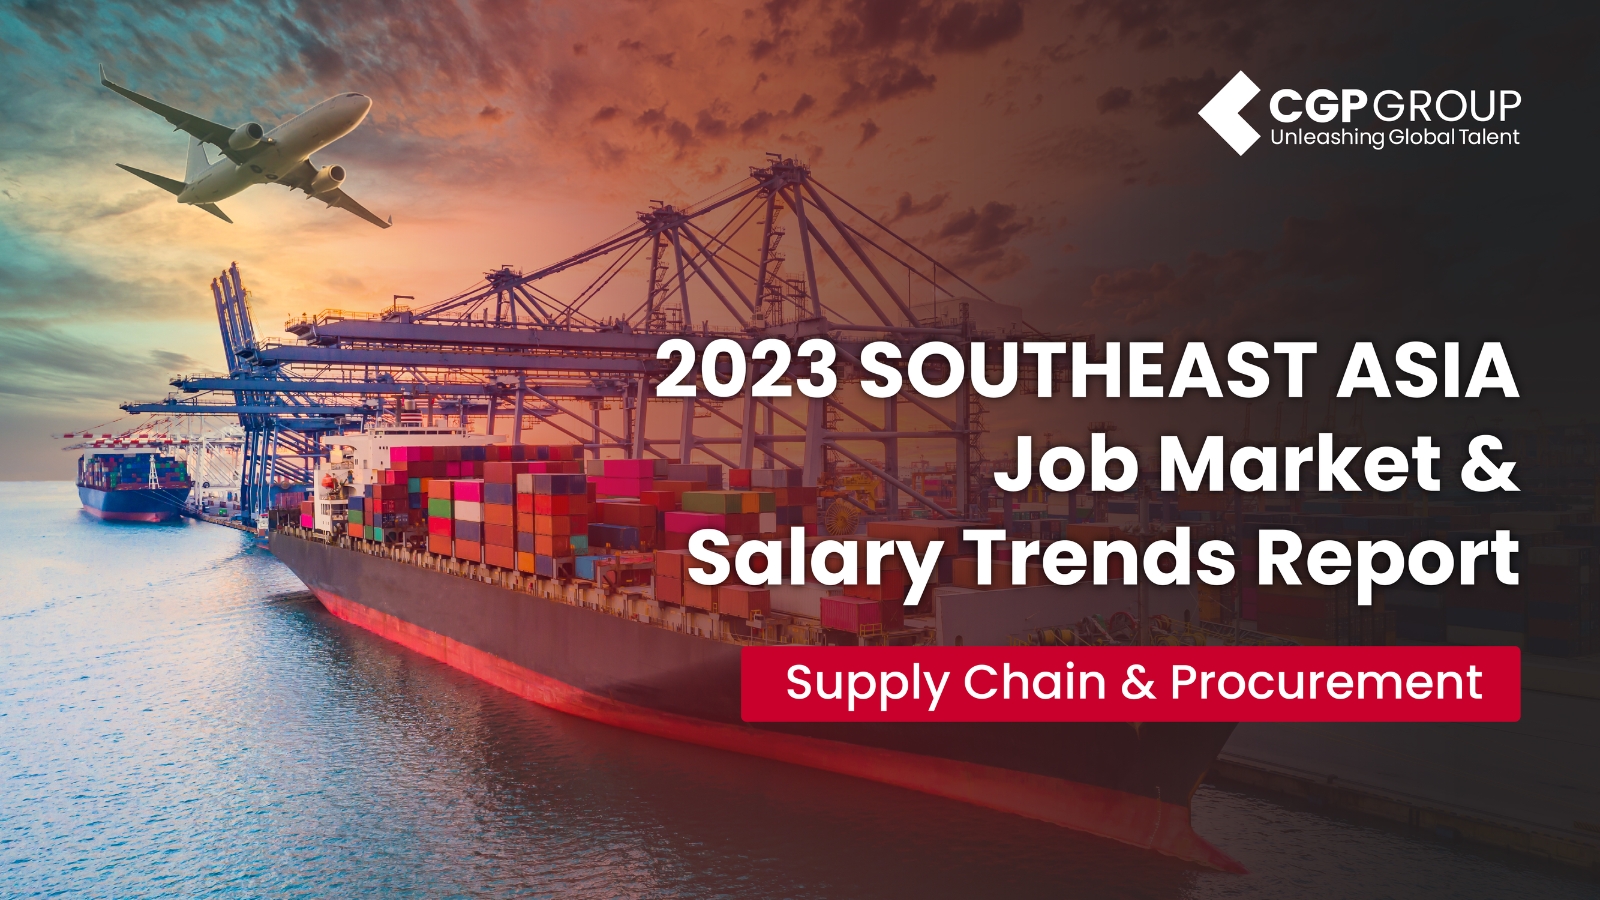 Supply Chain & Procurement Jobs in Singapore: 2023 Salary Guide & Market Outlook